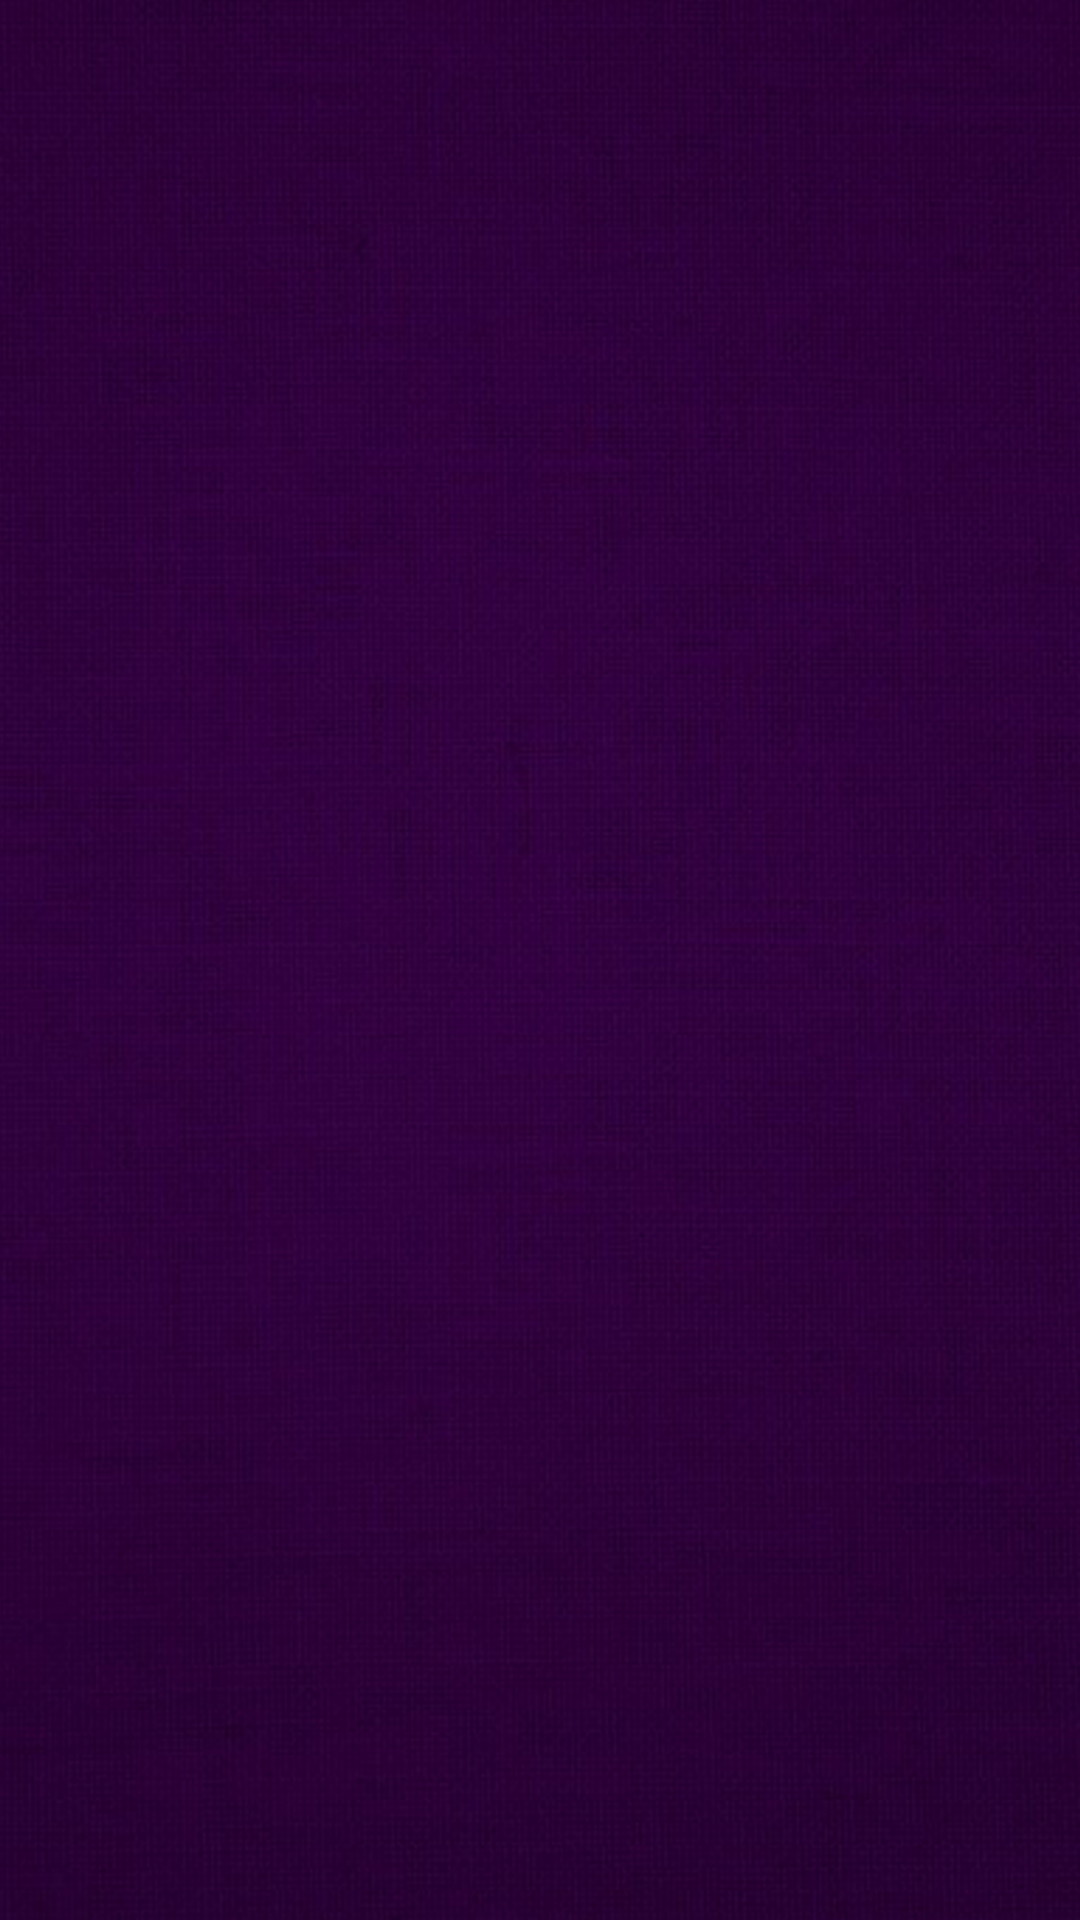 Purple Phone Wallpaper with high-resolution 1080x1920 pixel. Download all Mobile Wallpapers and Use them as wallpapers for your iPhone, Tablet, iPad, Android and other mobile devices